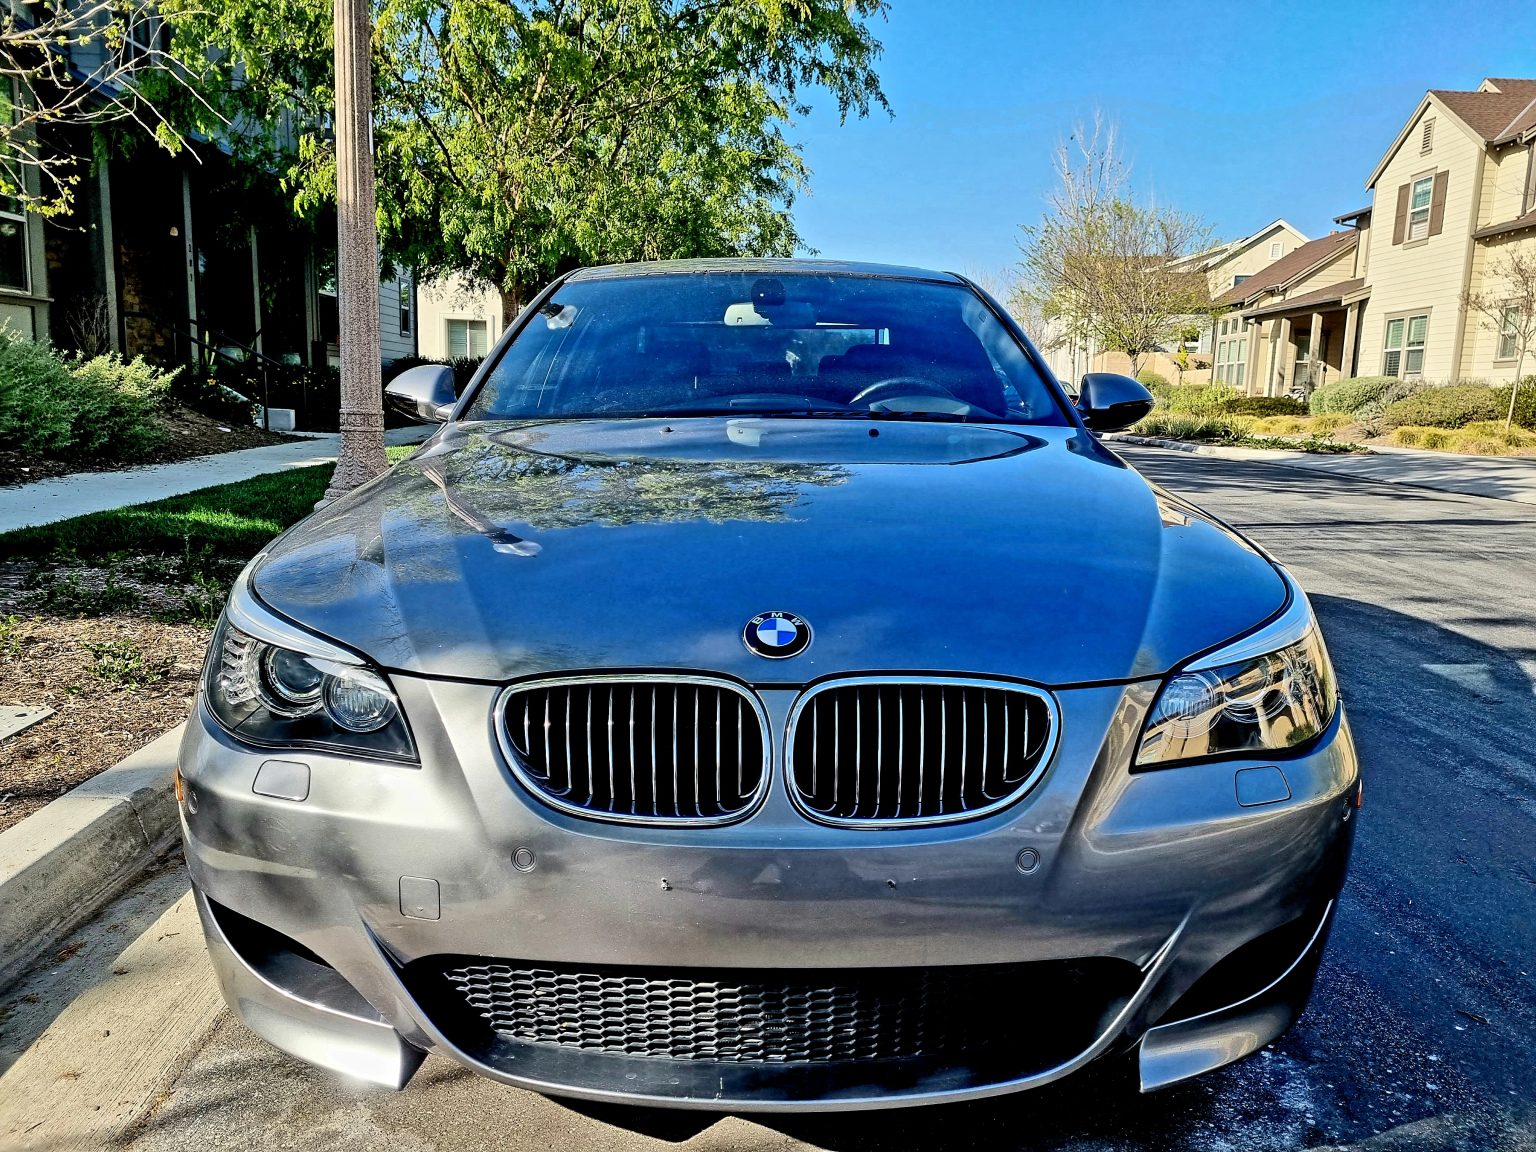 The Front Side View of a Grey BMW Car